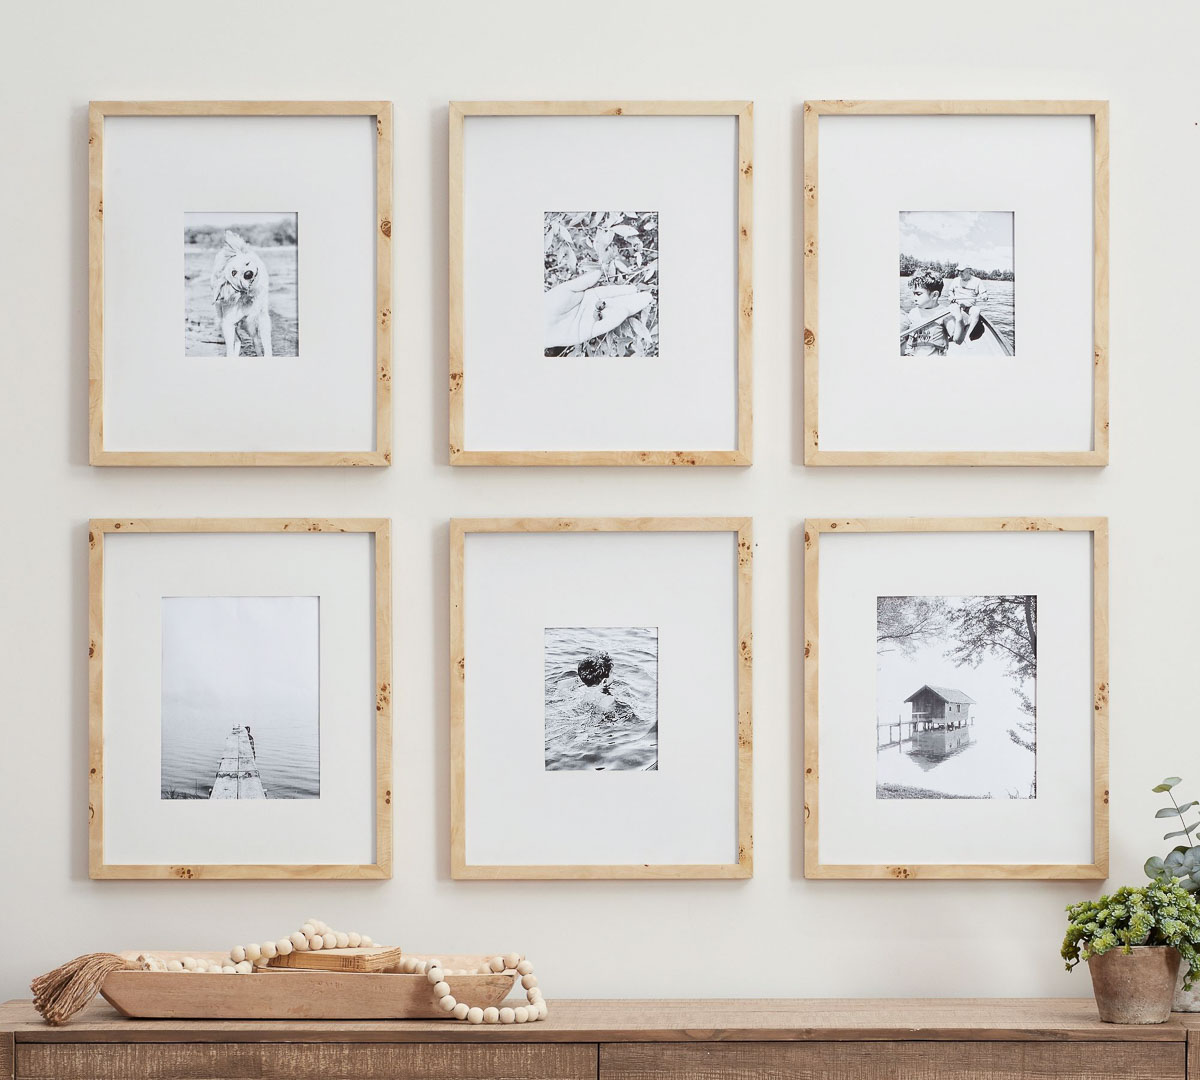 Set of 6 same sized frames hung in a classic grid as a simple gallery wall layout